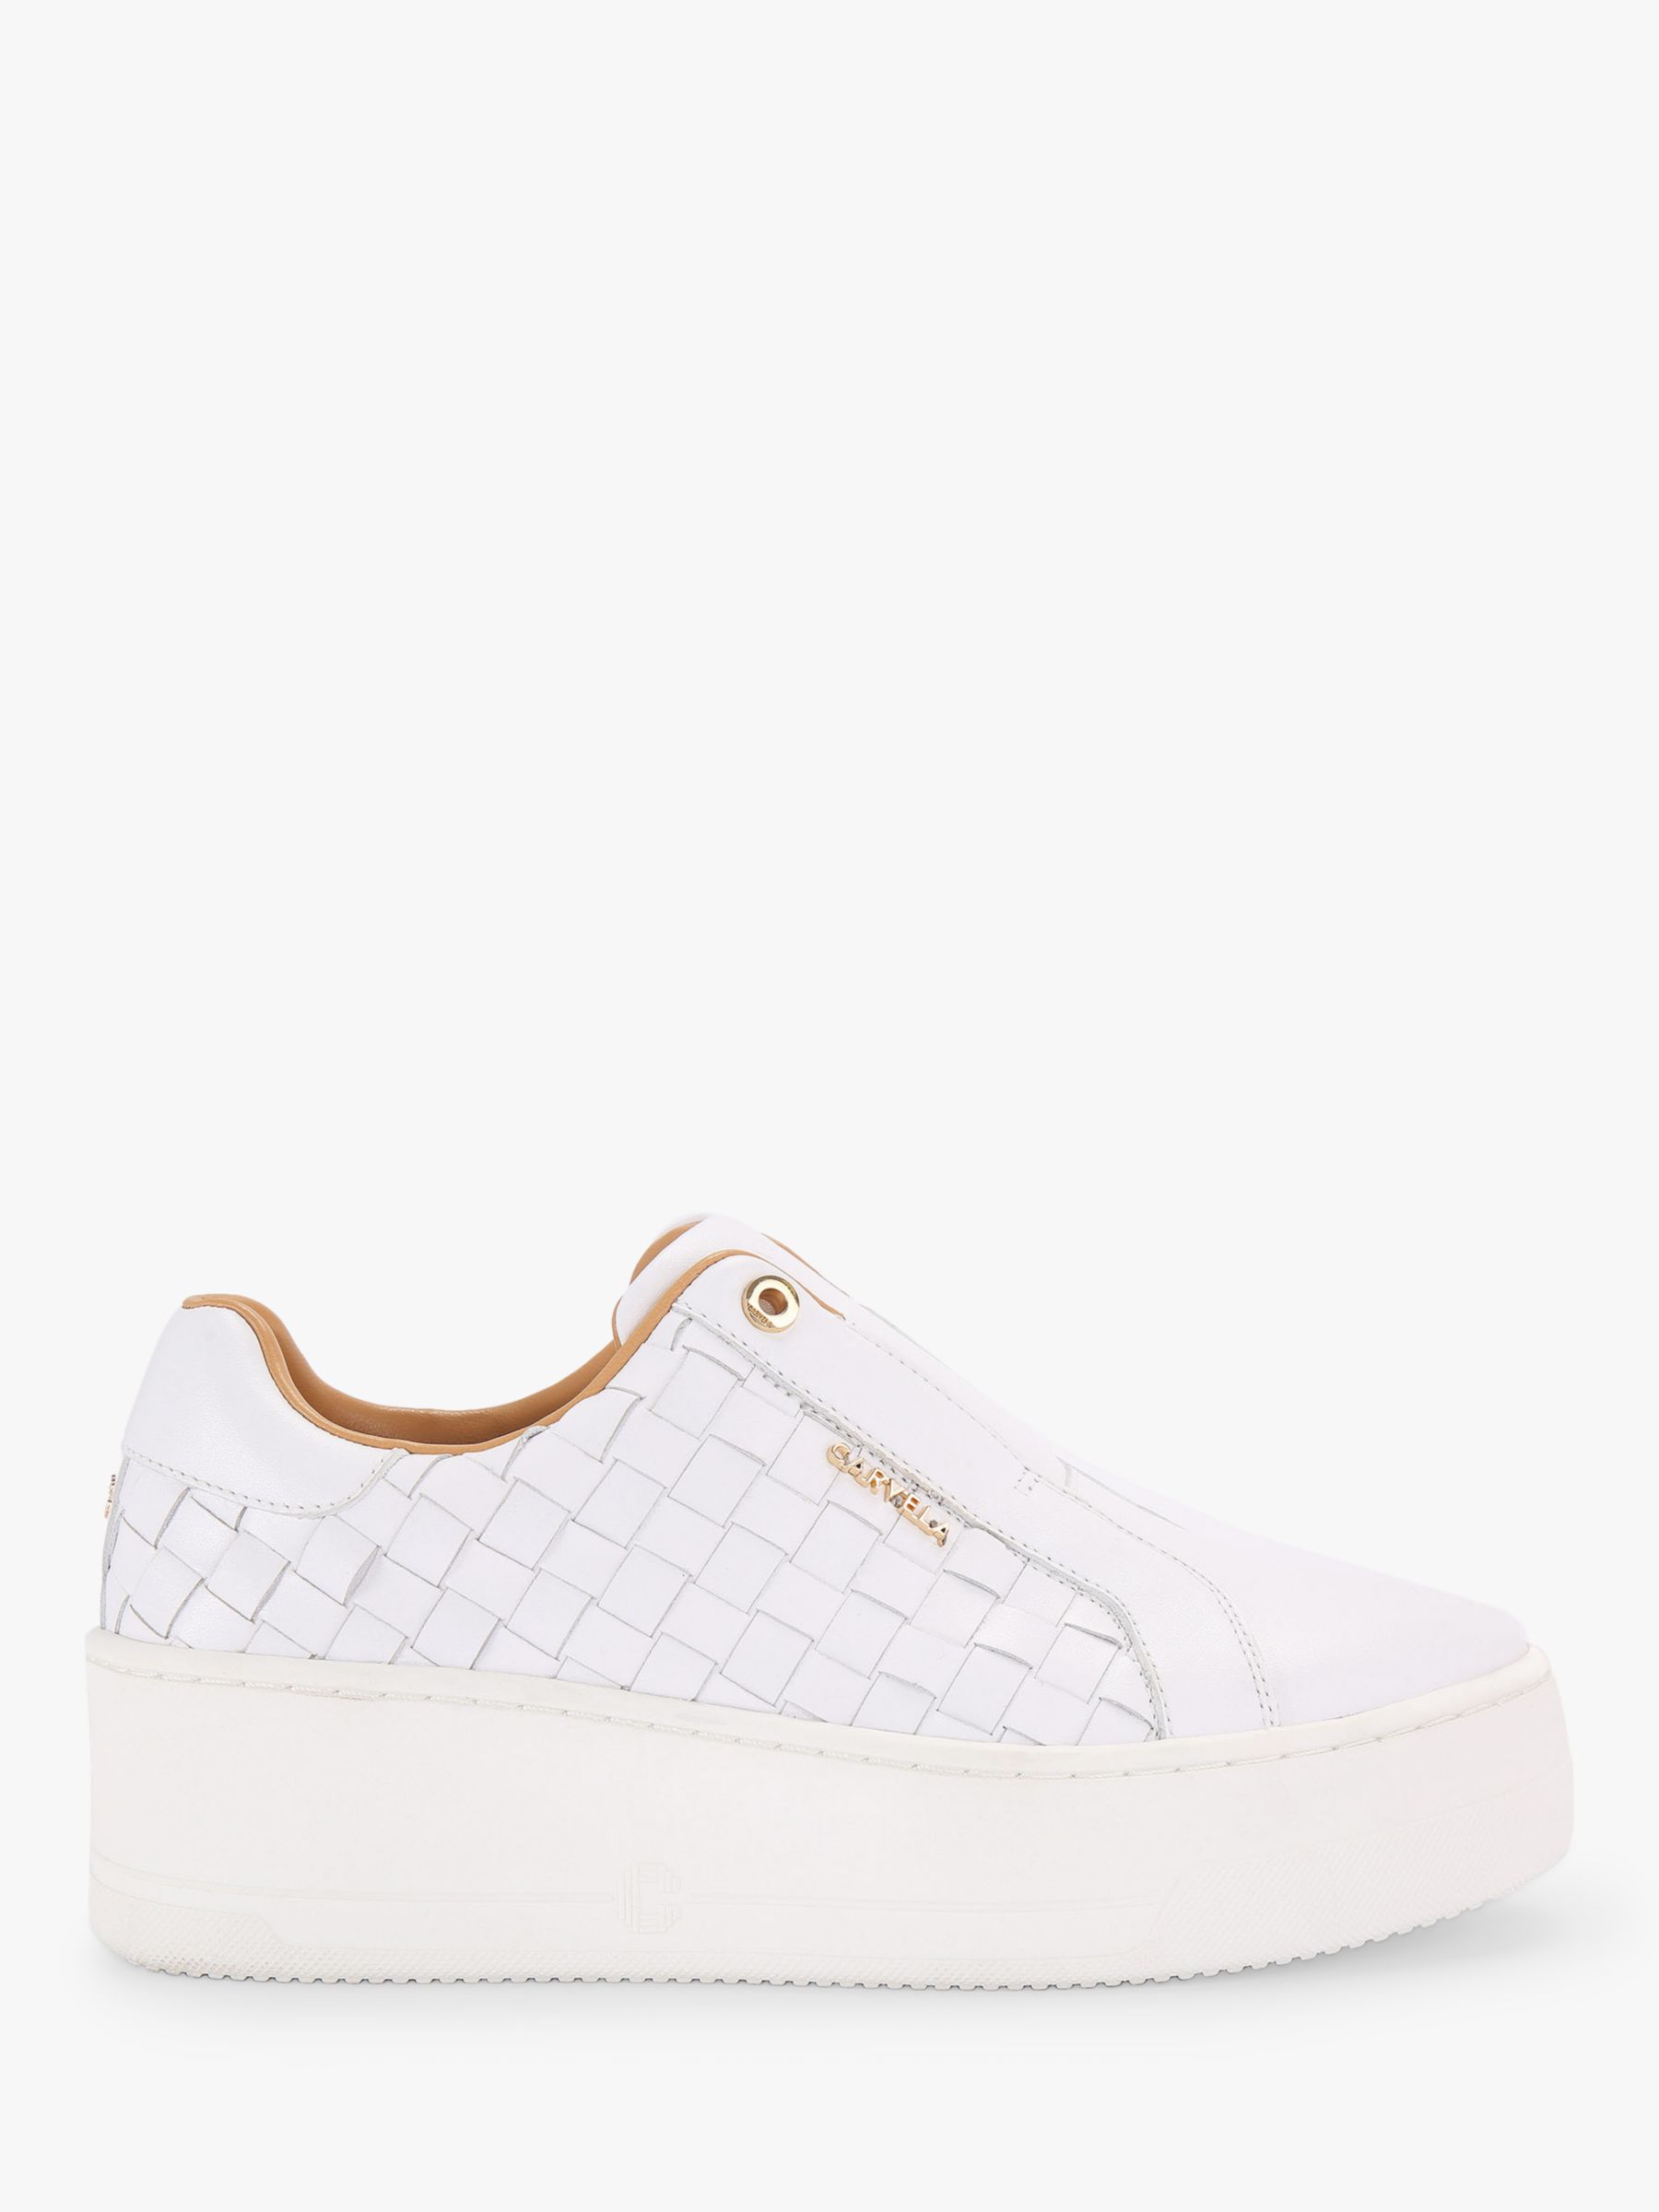 Carvela Connected Leather Slip On Trainers, White at John Lewis & Partners